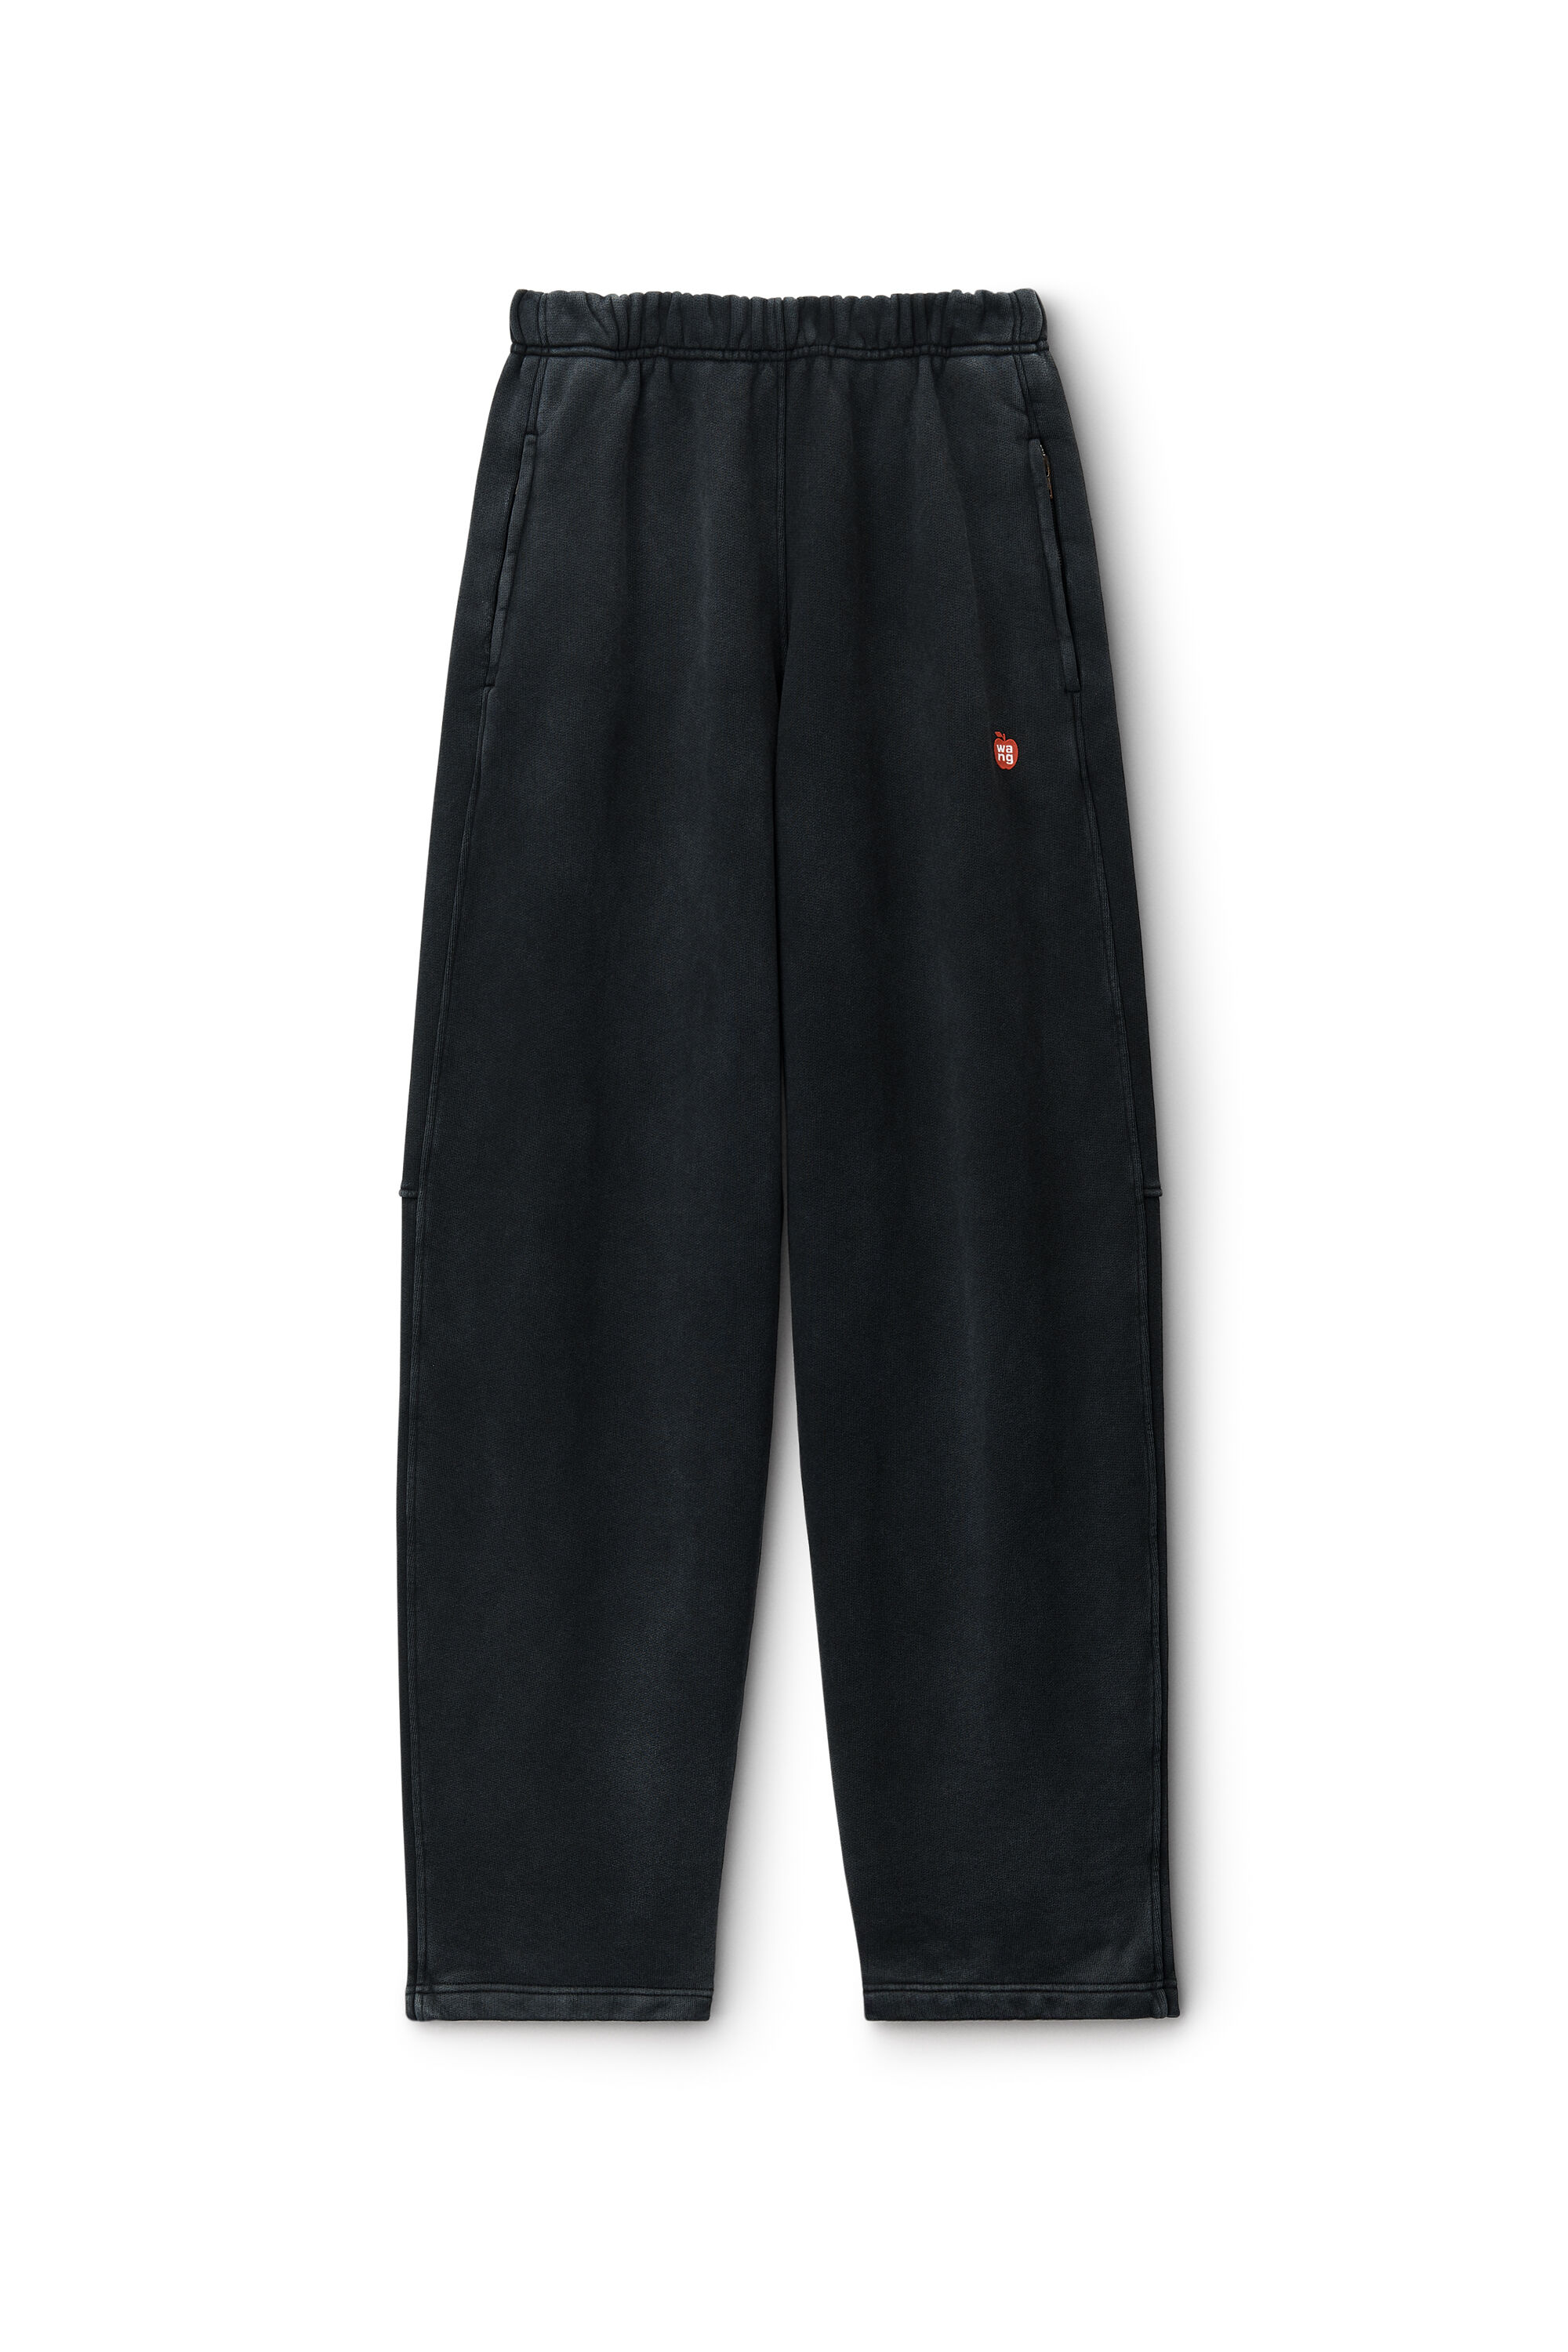 alexanderwang High Waisted Sweatpant in Classic Terry WASHED JET